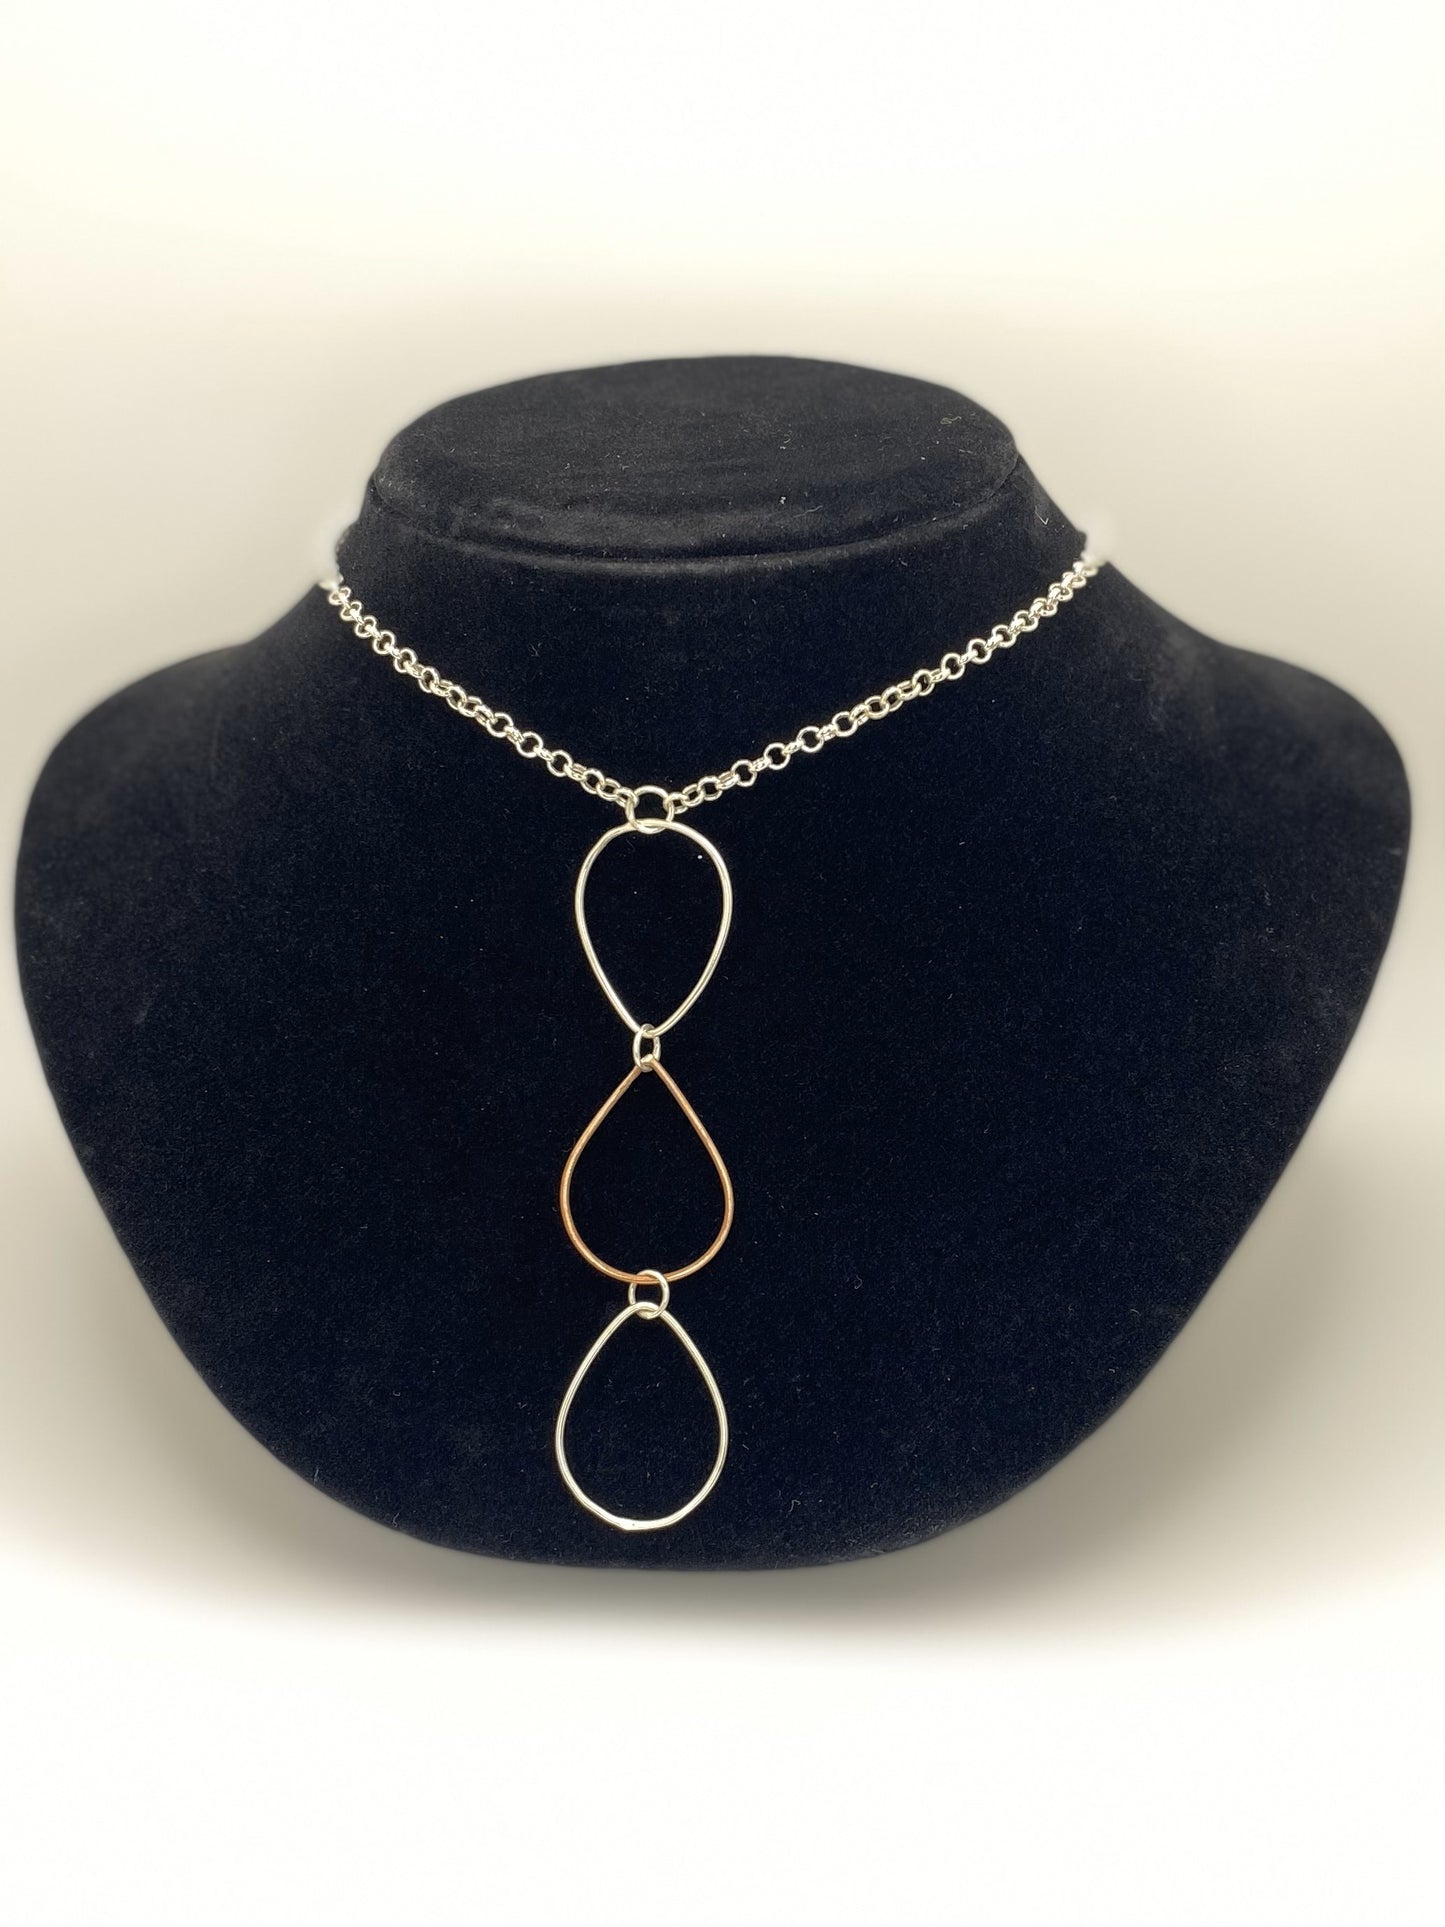 Three Teardrop Handmade Necklace in Sterling Silver and Copper